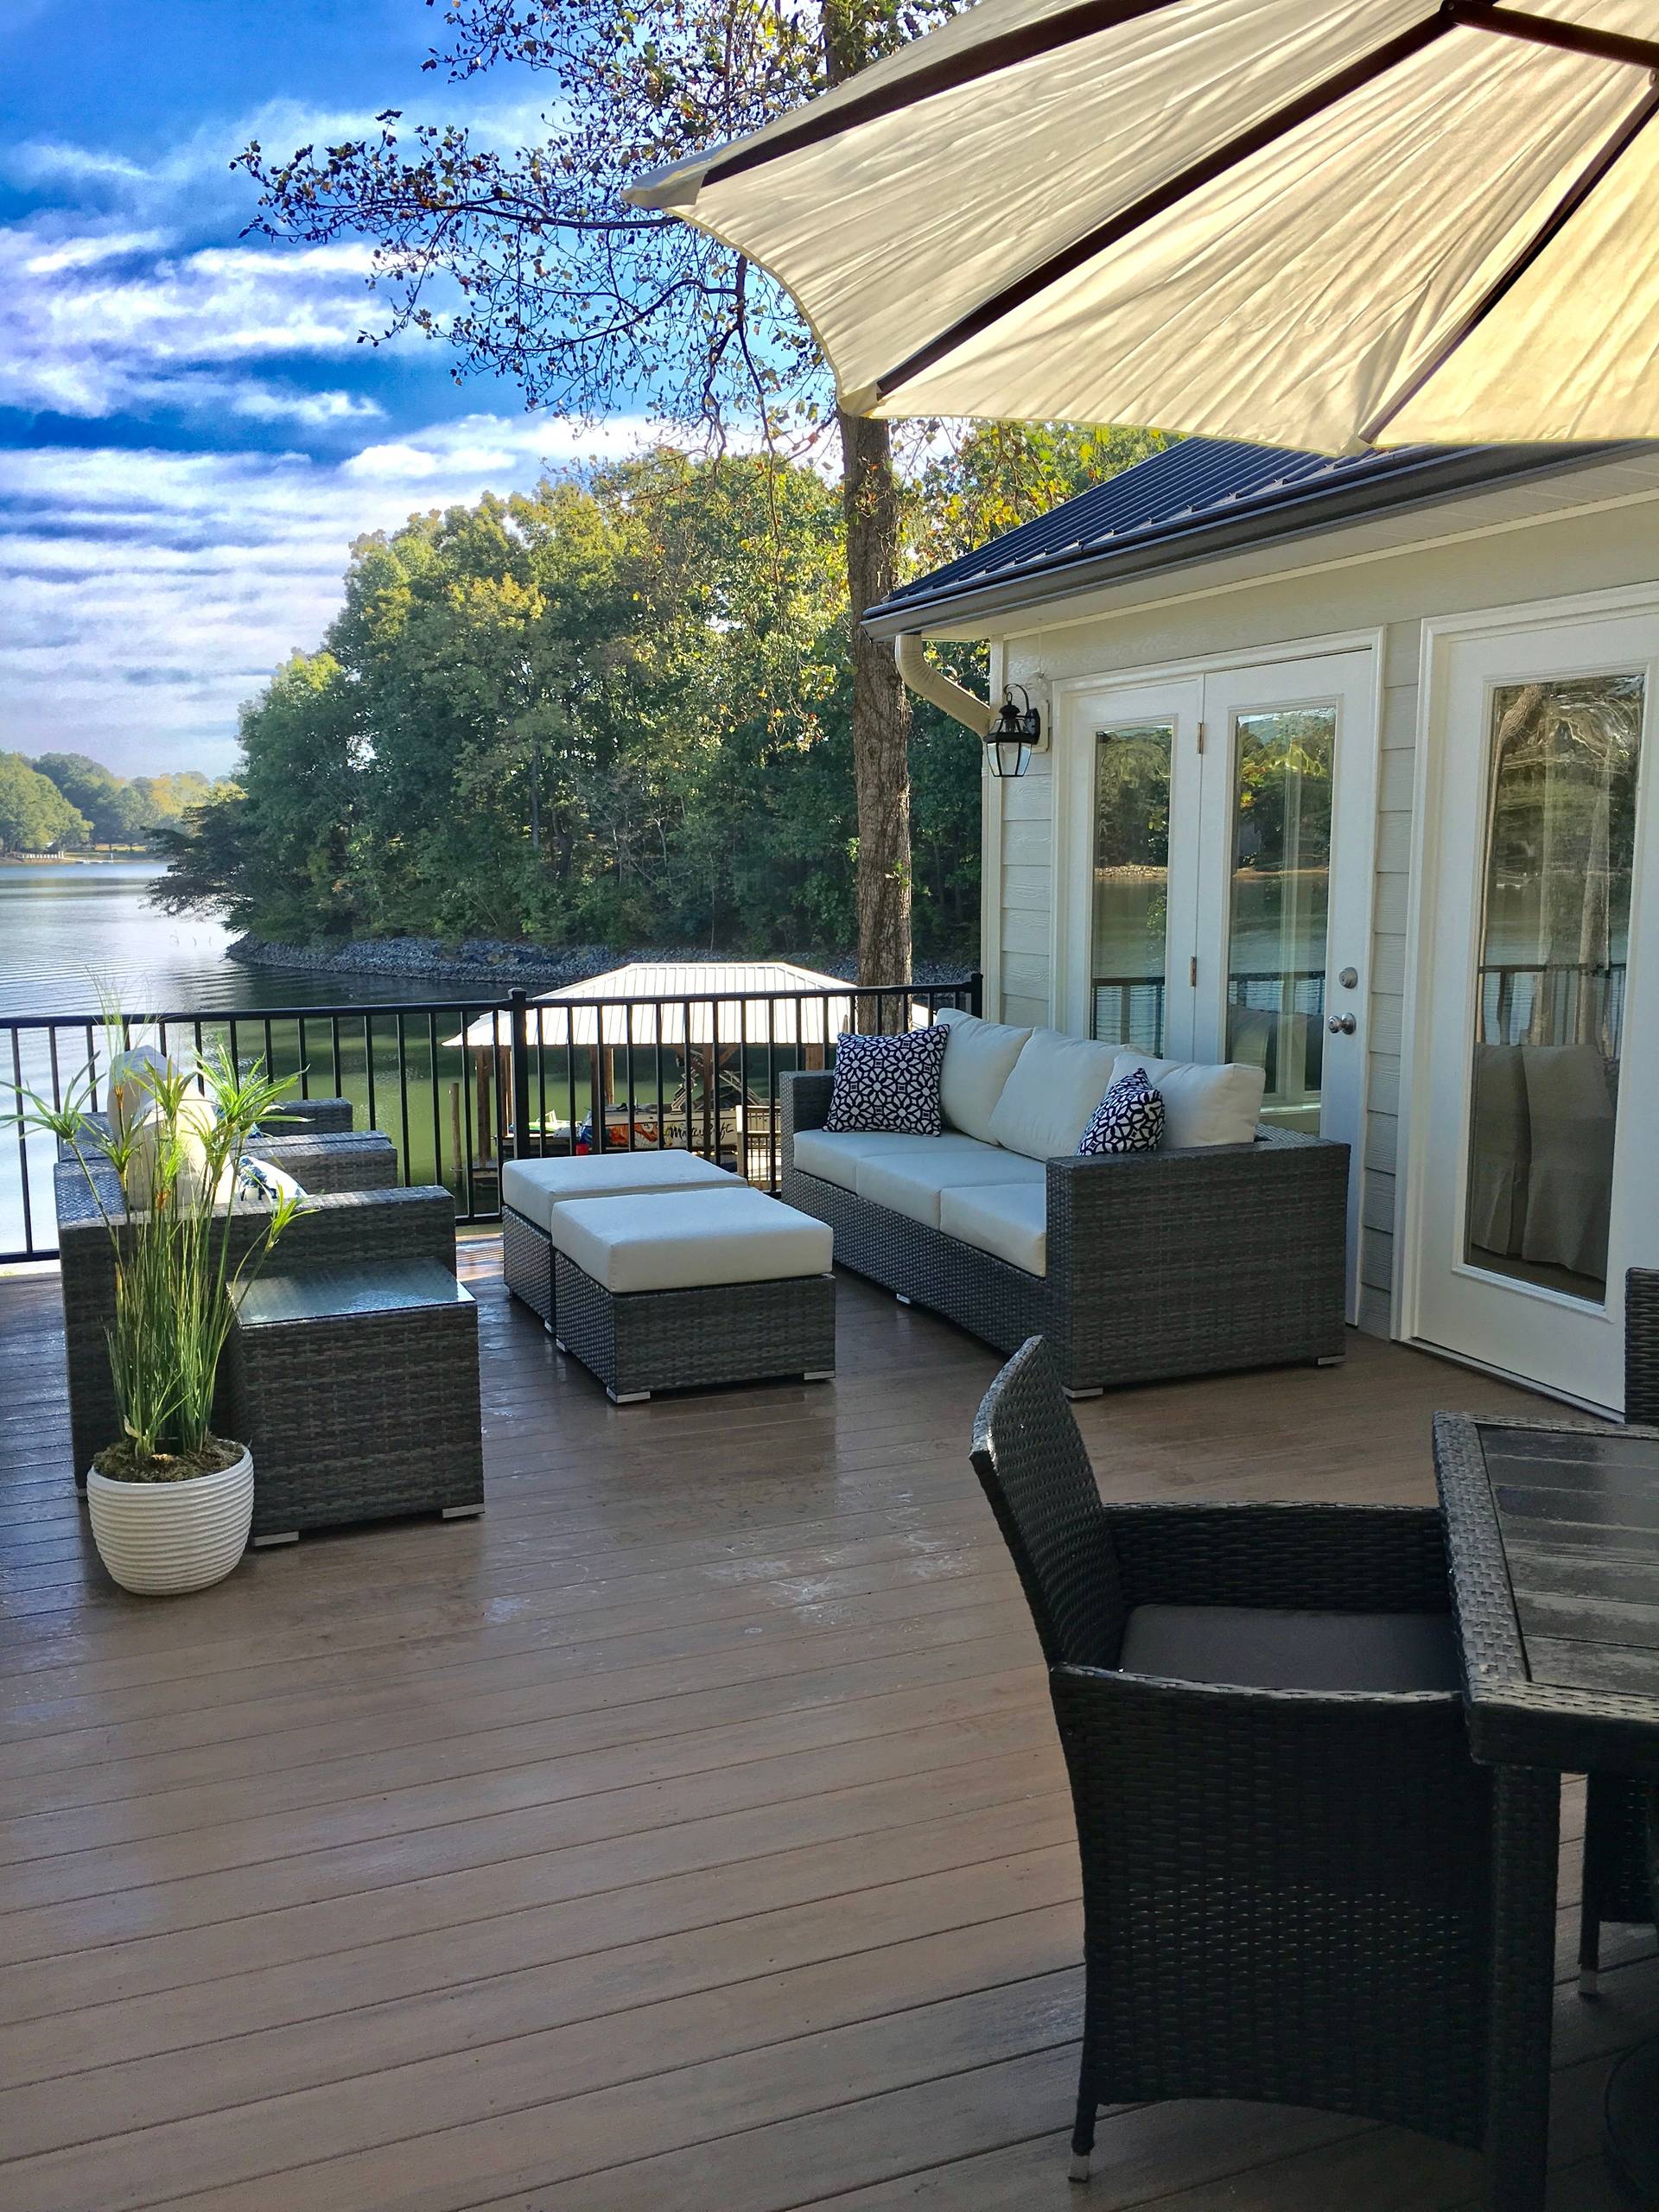 Lake front cotttage - bringing the outdoors in on Lake Norman